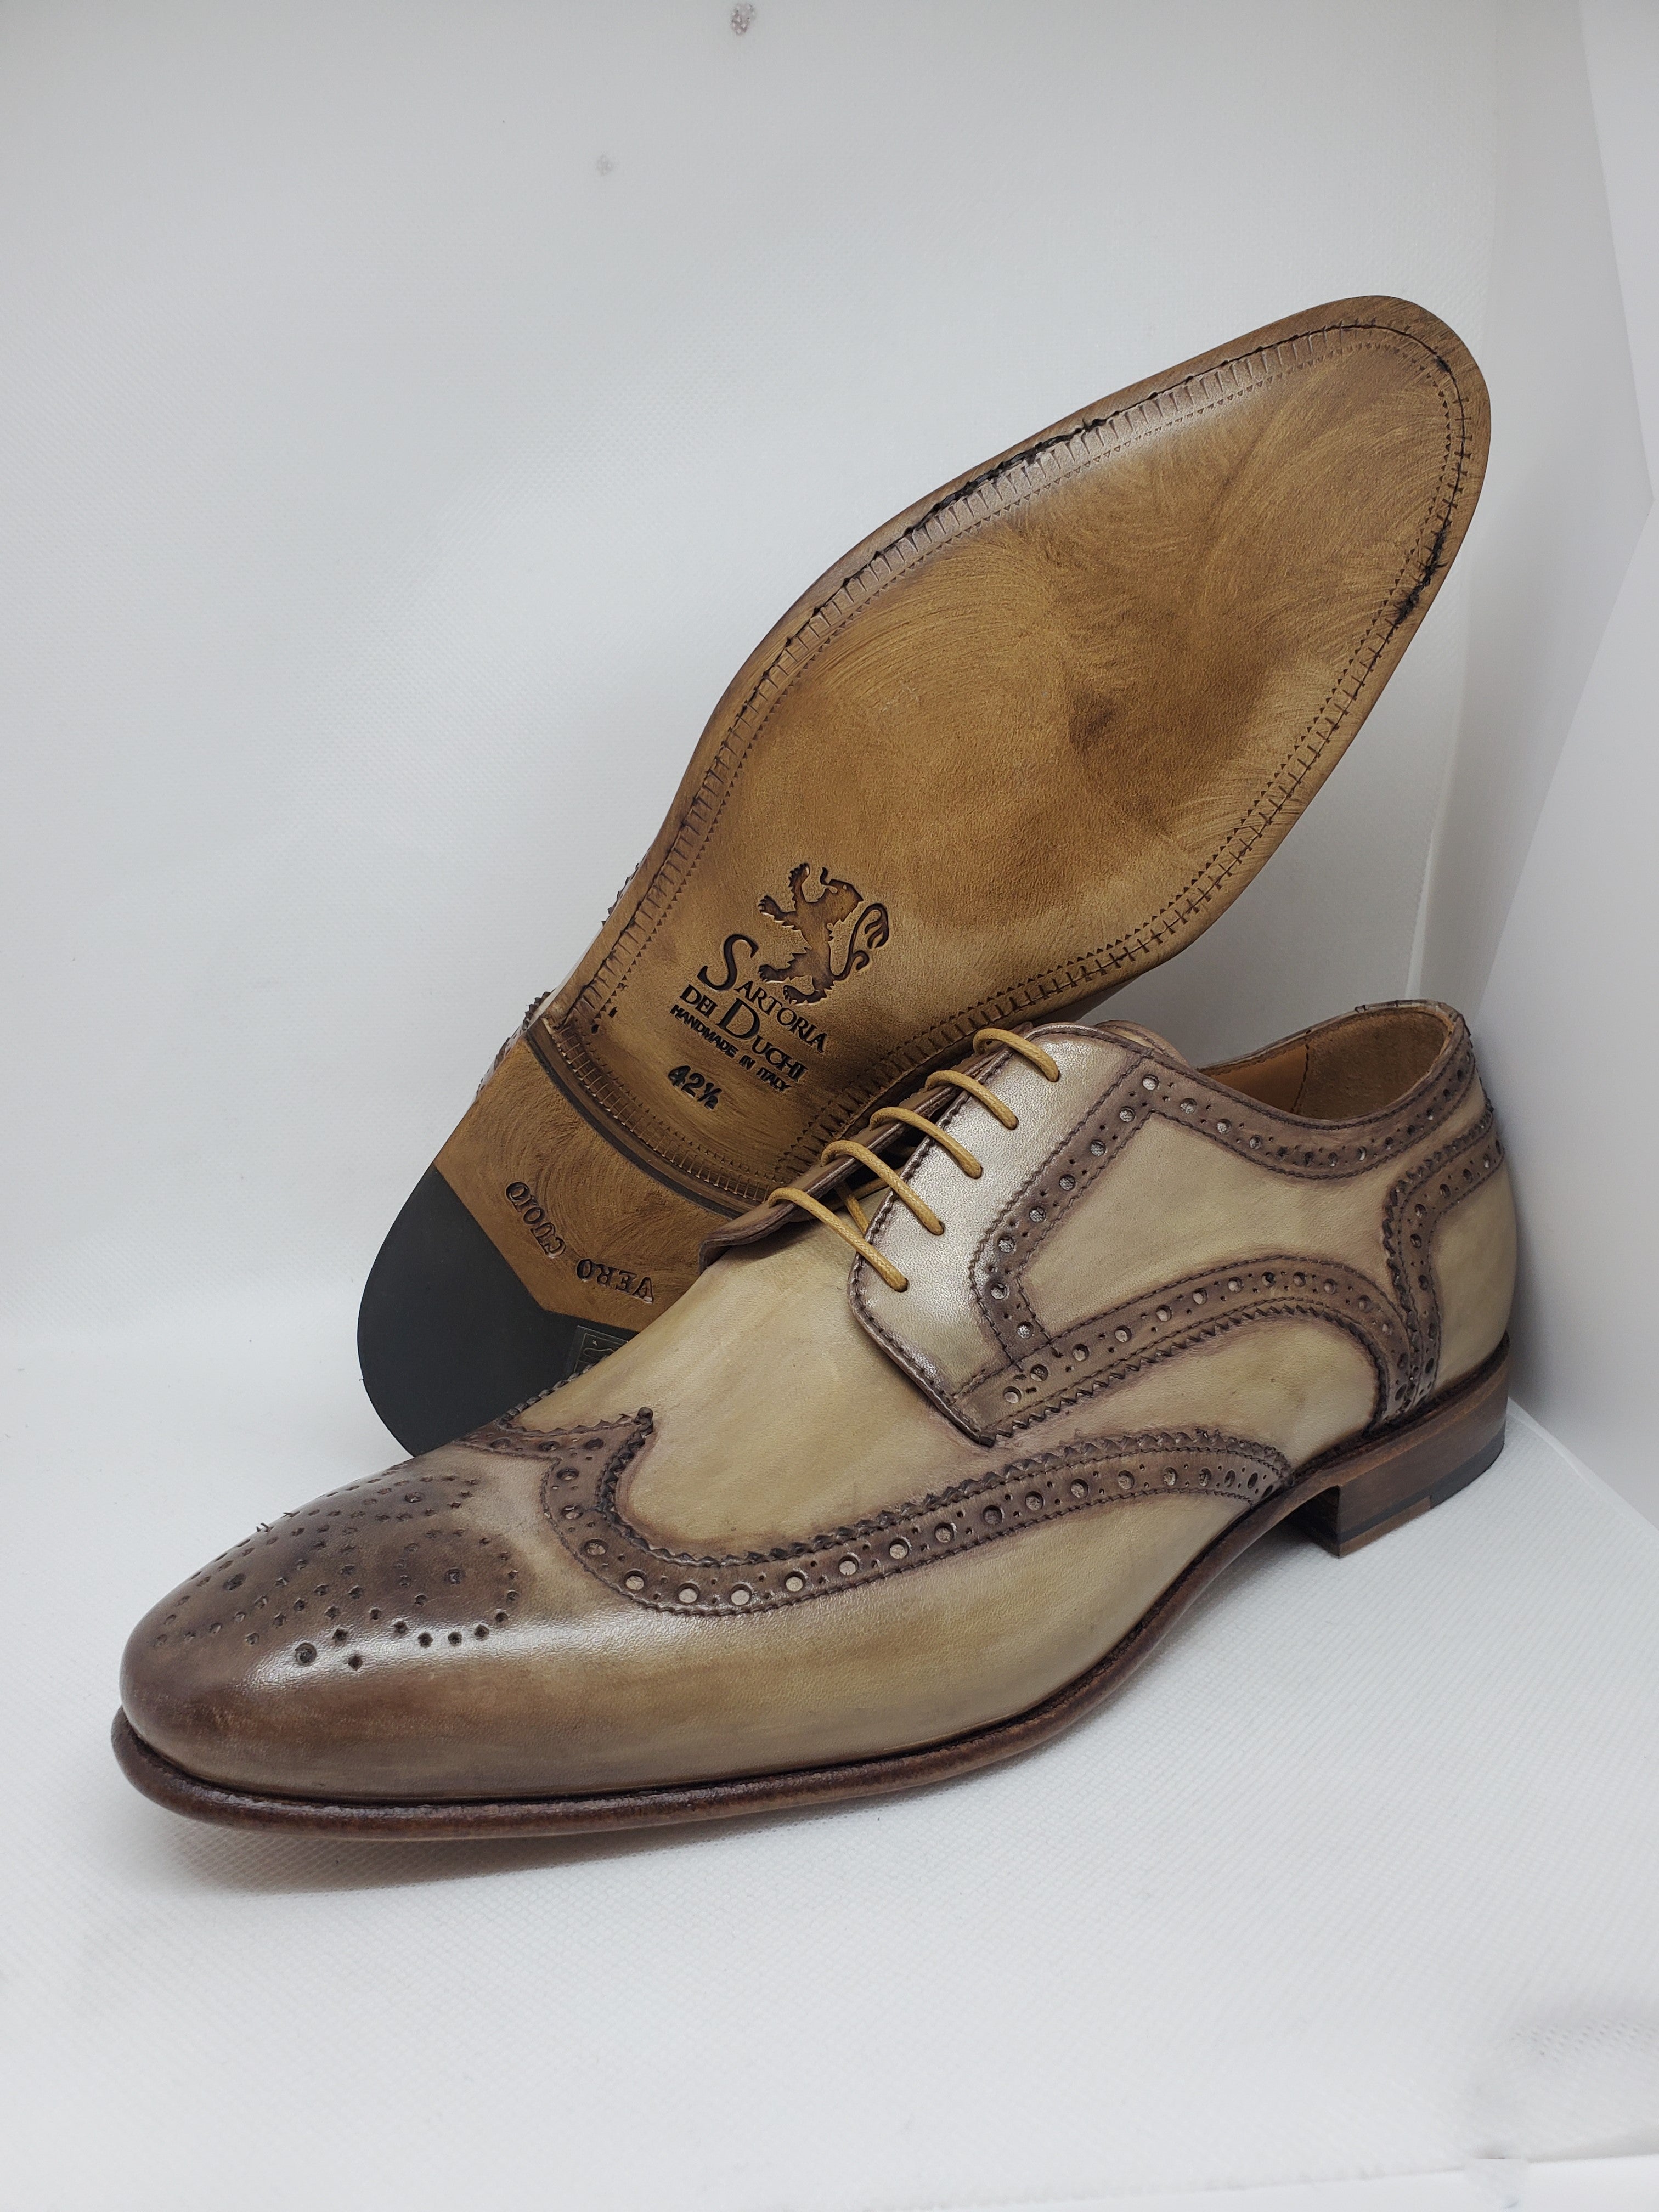 Classic derby shoes 100% made in Italy with Blake stitching, made with crust calfskin and hand antiqued and colored.The Blake process the shoe is mounted on the shoe tree, and a machine called "Blake" the sole is sewn to the insole and the upper. This procedure guarantees the high quality seal of the fund.A classic refined shoe, perfect for your everyday occasions. | Sartoria Dei Duchi - Atri